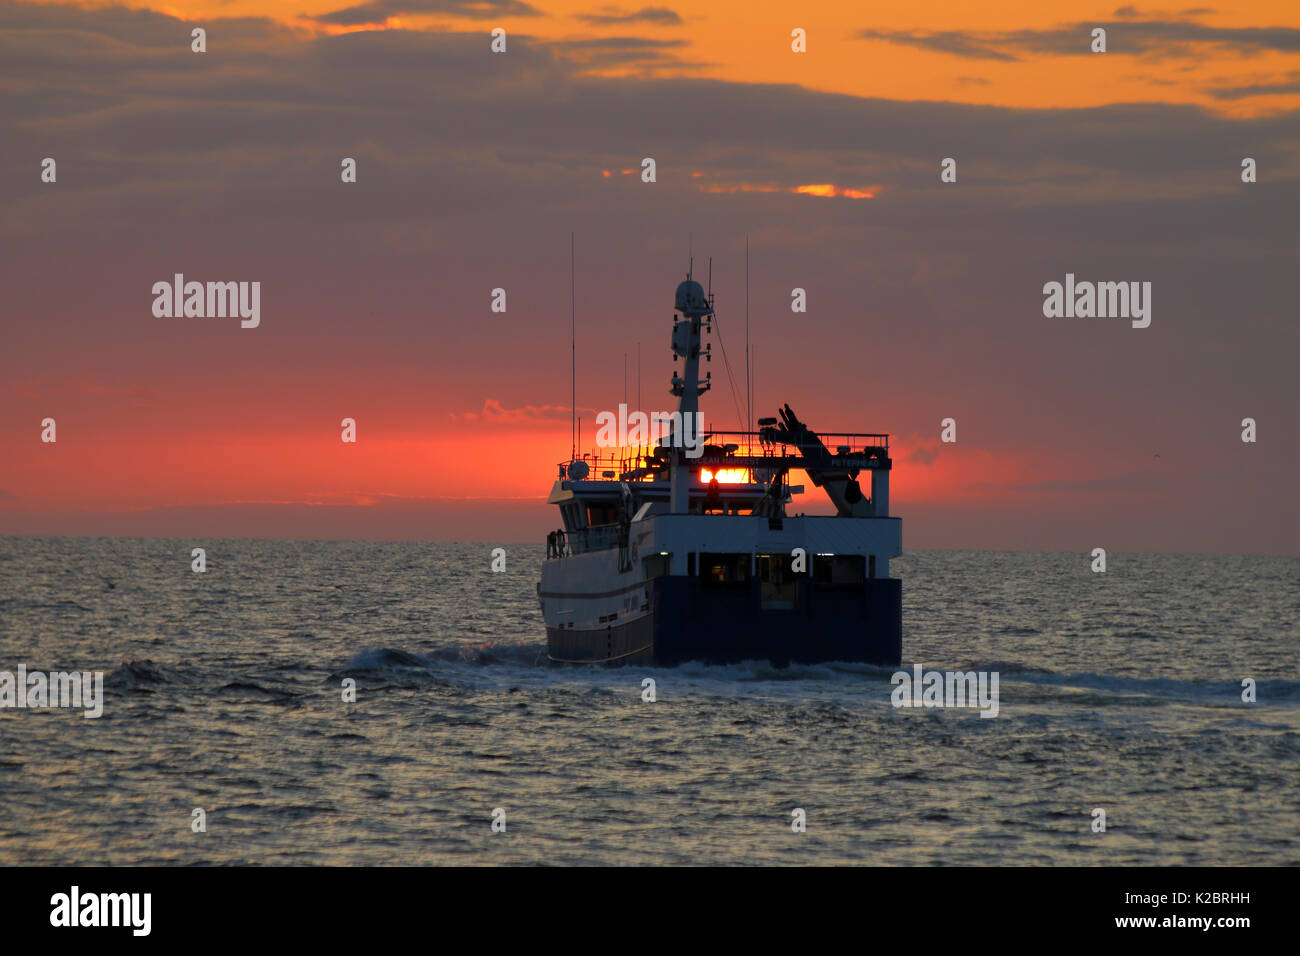 Fishing vessel 'Ocean Harvest' heading for home as the sun sets over the North Sea, UK, August 2014. Property released.  All non-editorial uses must be cleared individually. Stock Photo